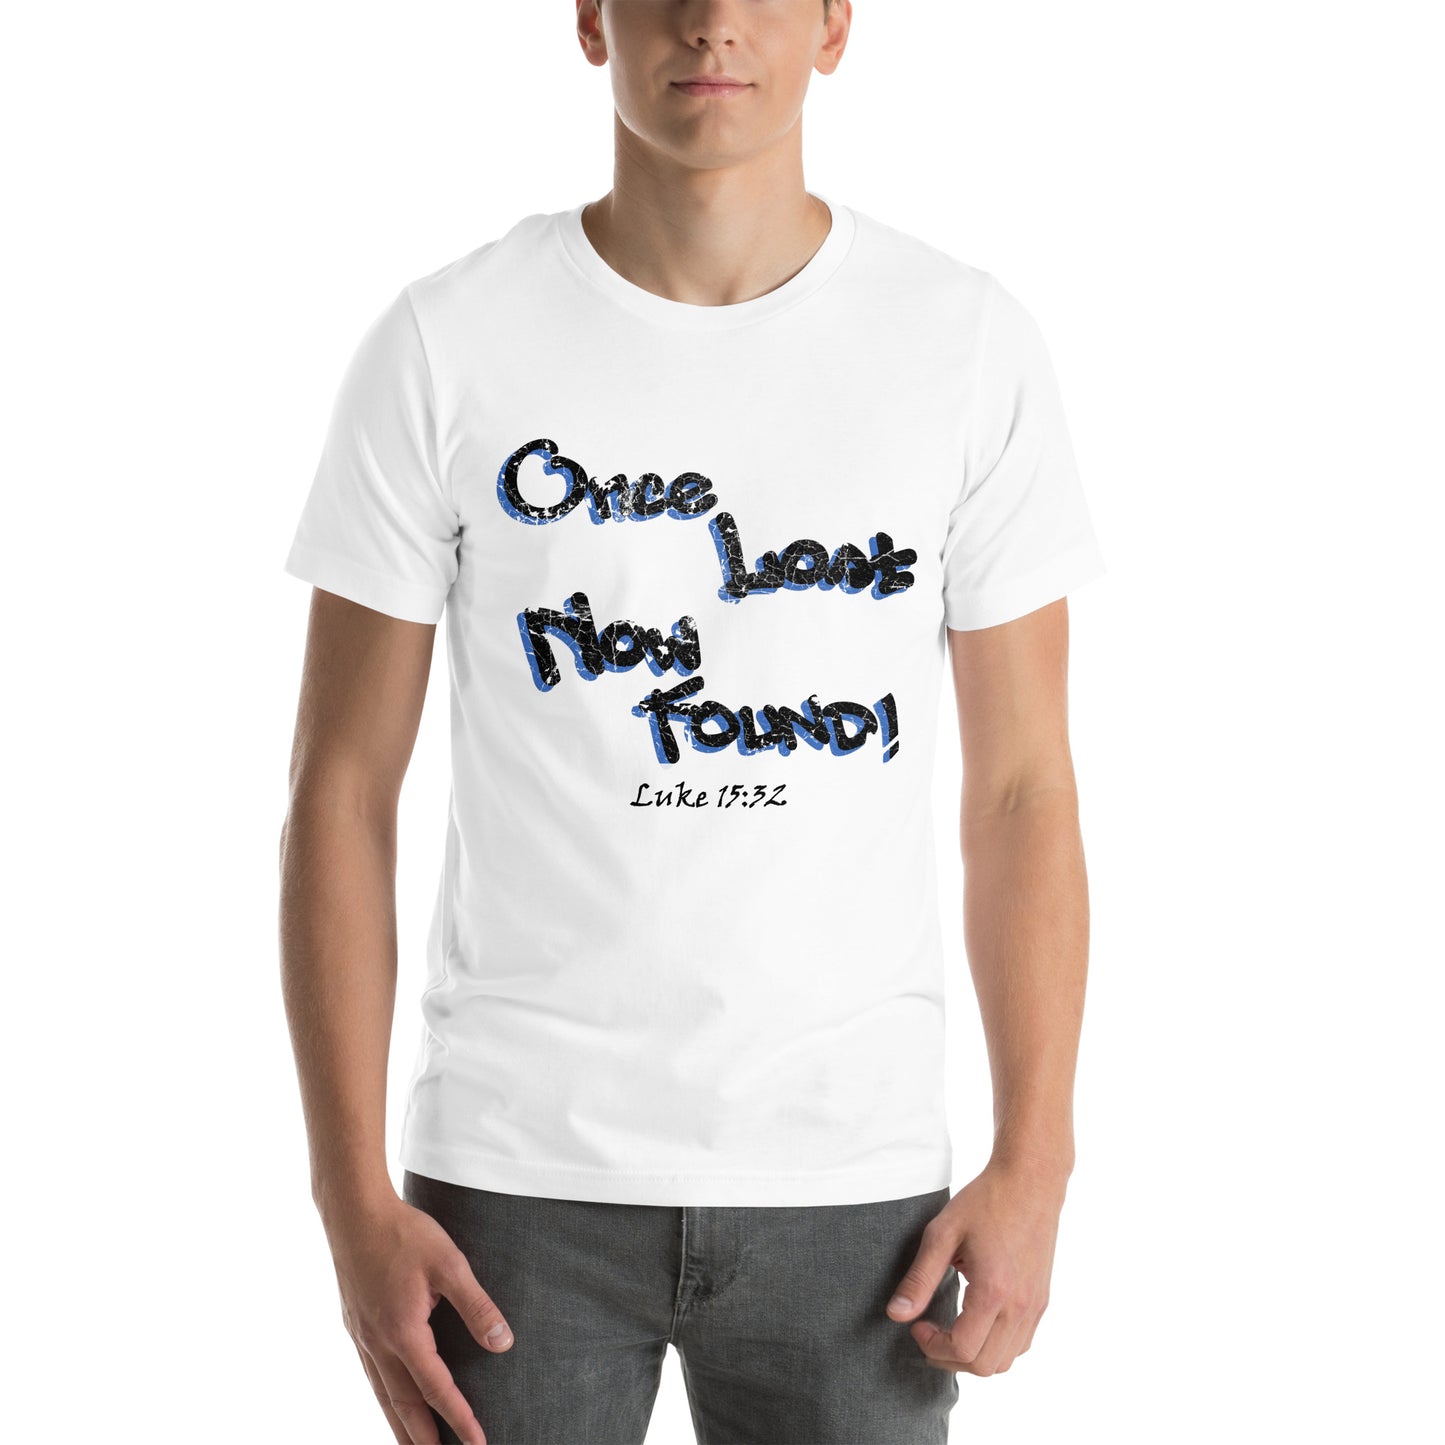 Once Lost Now Found! Grunge Graffiti Unisex t-shirt - Solid Rock Designs | Christian Apparel